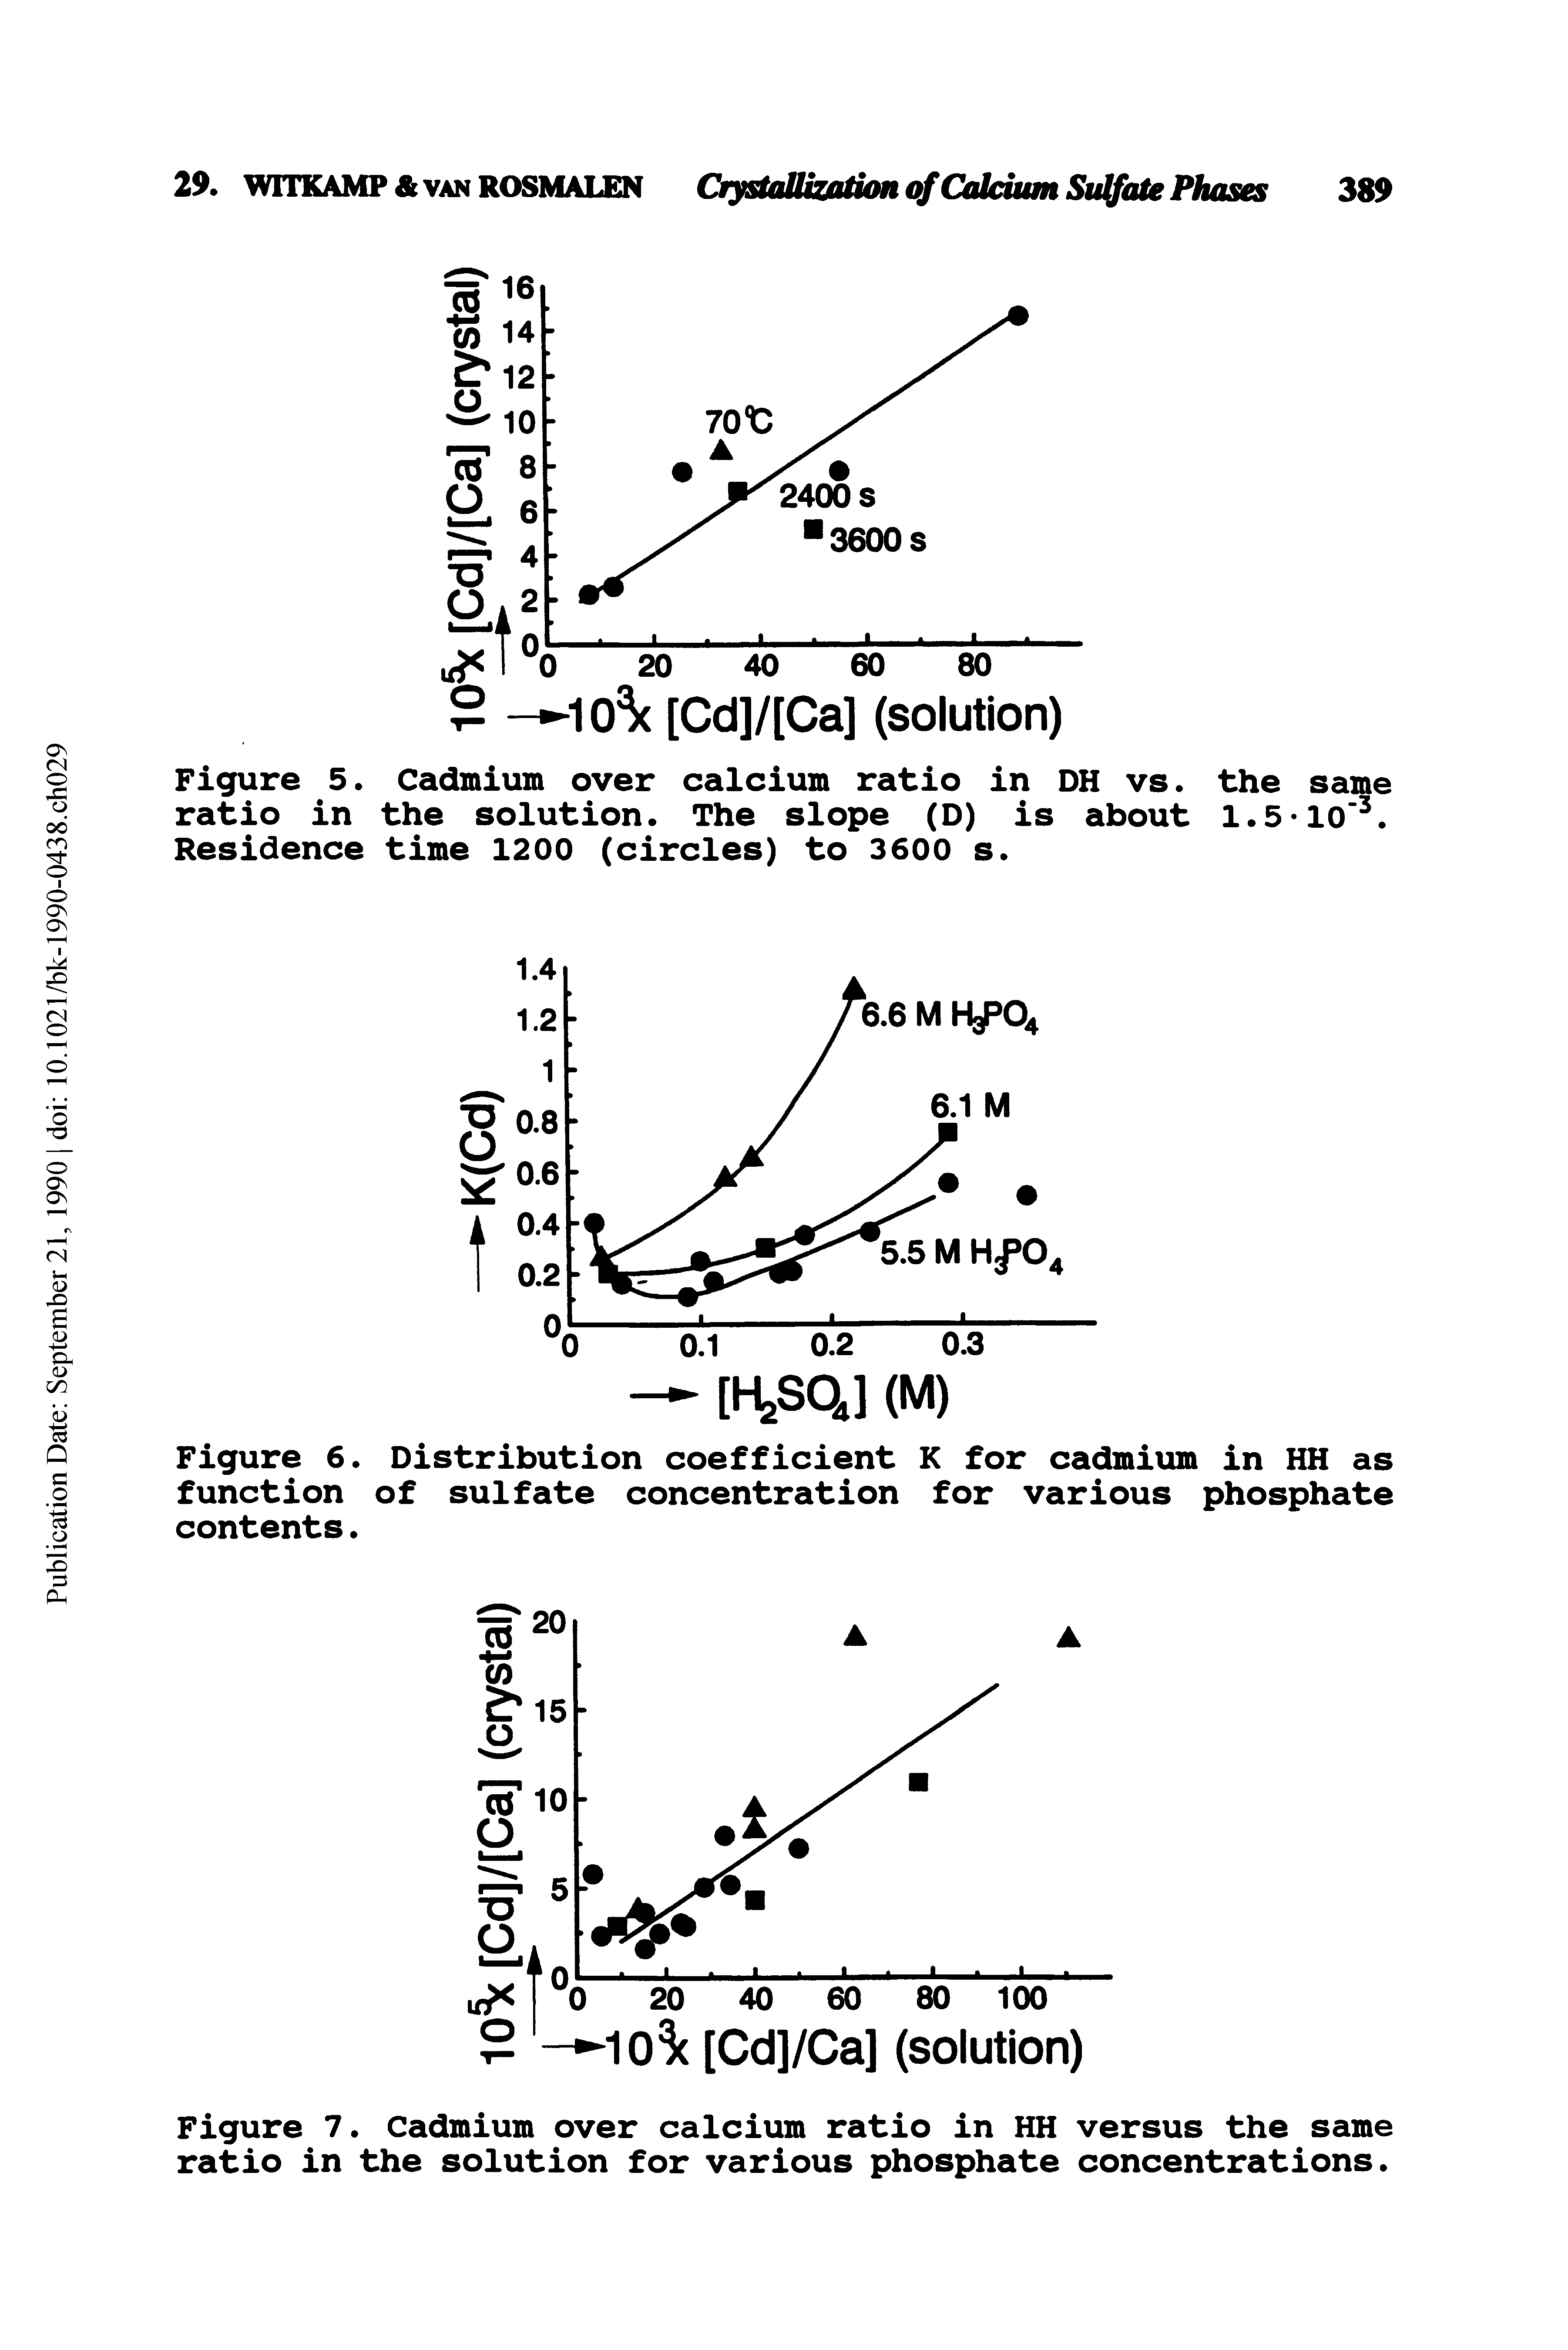 Figure 6. Distribution coefficient K for cadmium in HH as function of sulfate concentration for various phosphate contents.